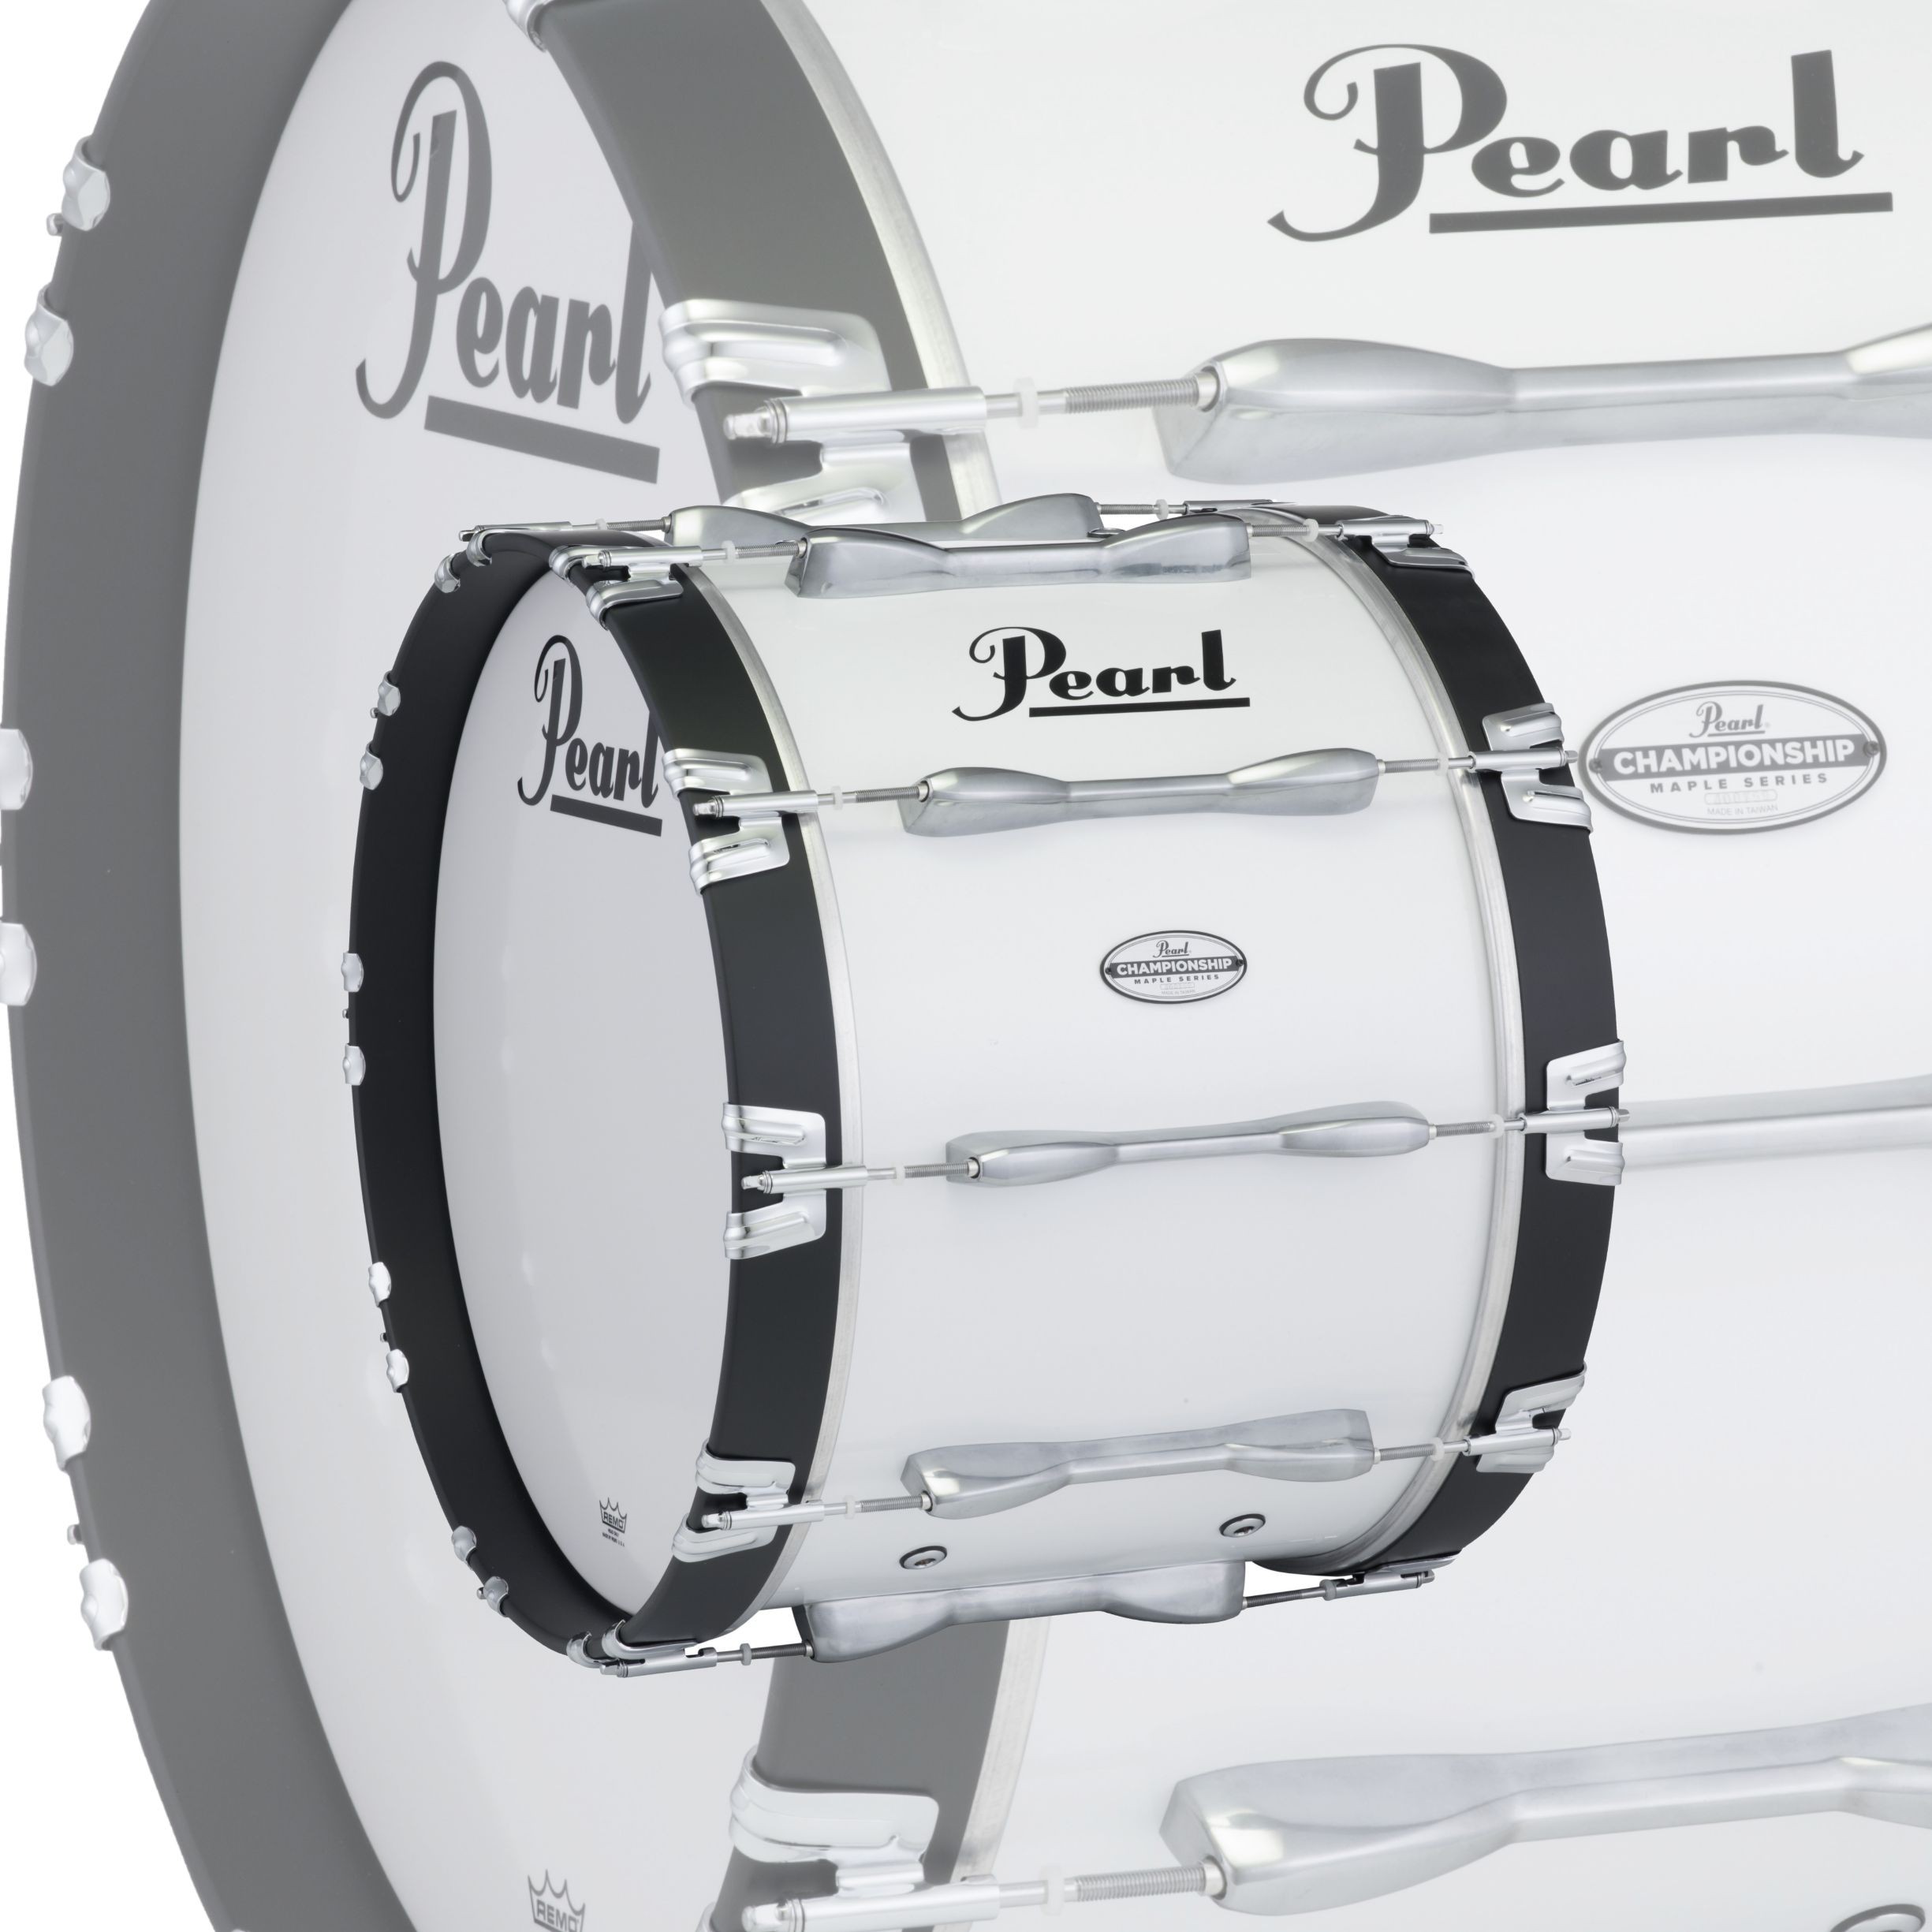 Pearl Maple Championship 28"x14" Marching Bass Drum